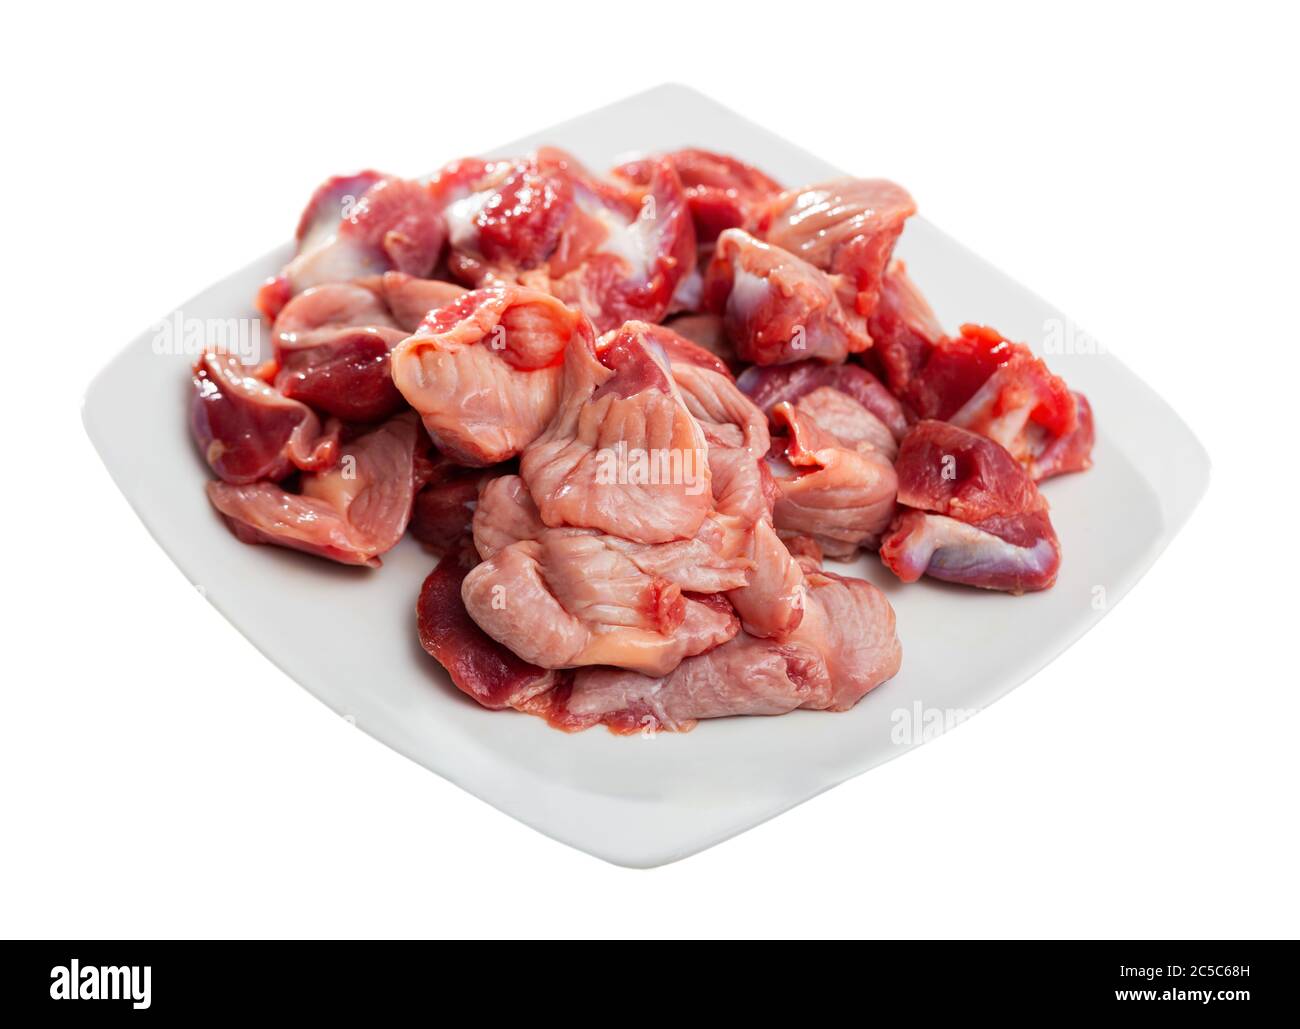 Closeup Of Fresh Raw Chicken Gizzards Ready For Cooking In White Plate Isolated Over White Background Stock Photo Alamy,Perennial Flowers